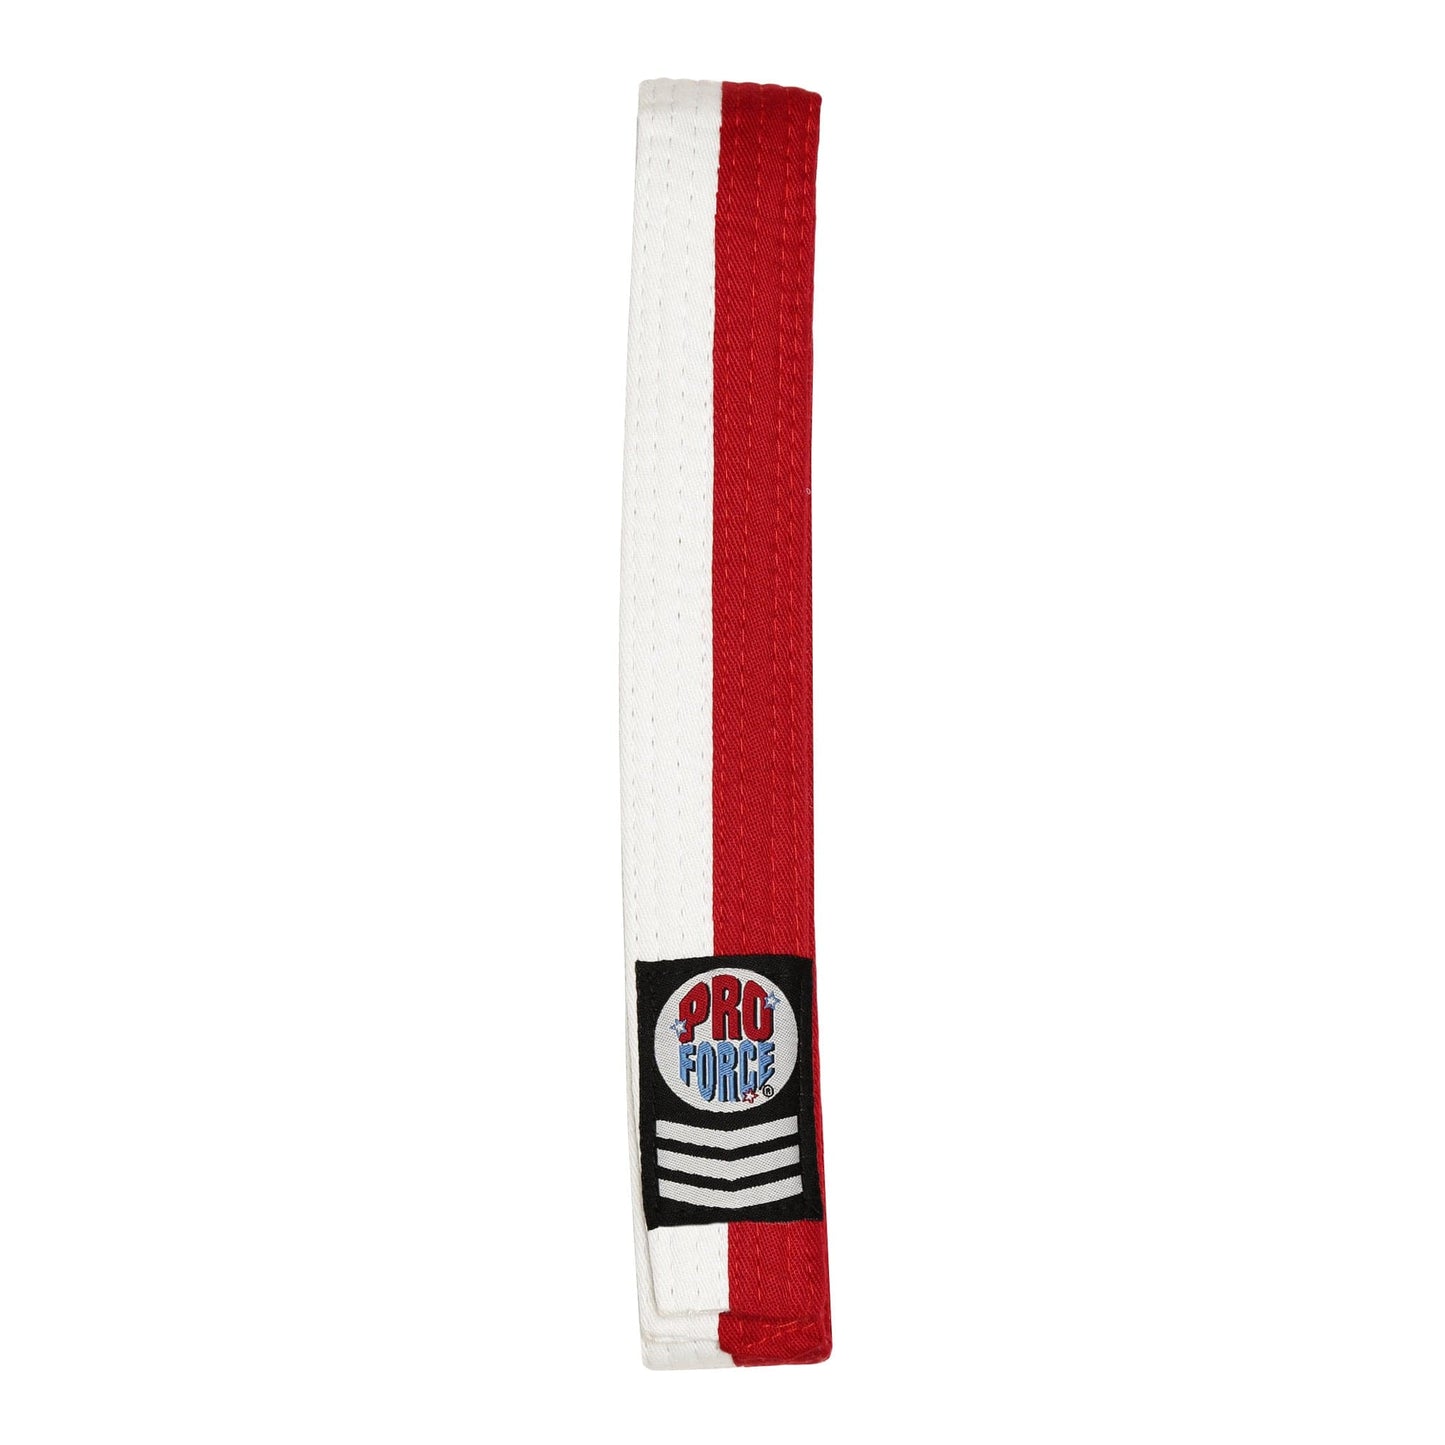 ProForce karate belt Red / 0 child Small ProForce 1.5 inch wide Double Wrap Two-Tone Karate Belt